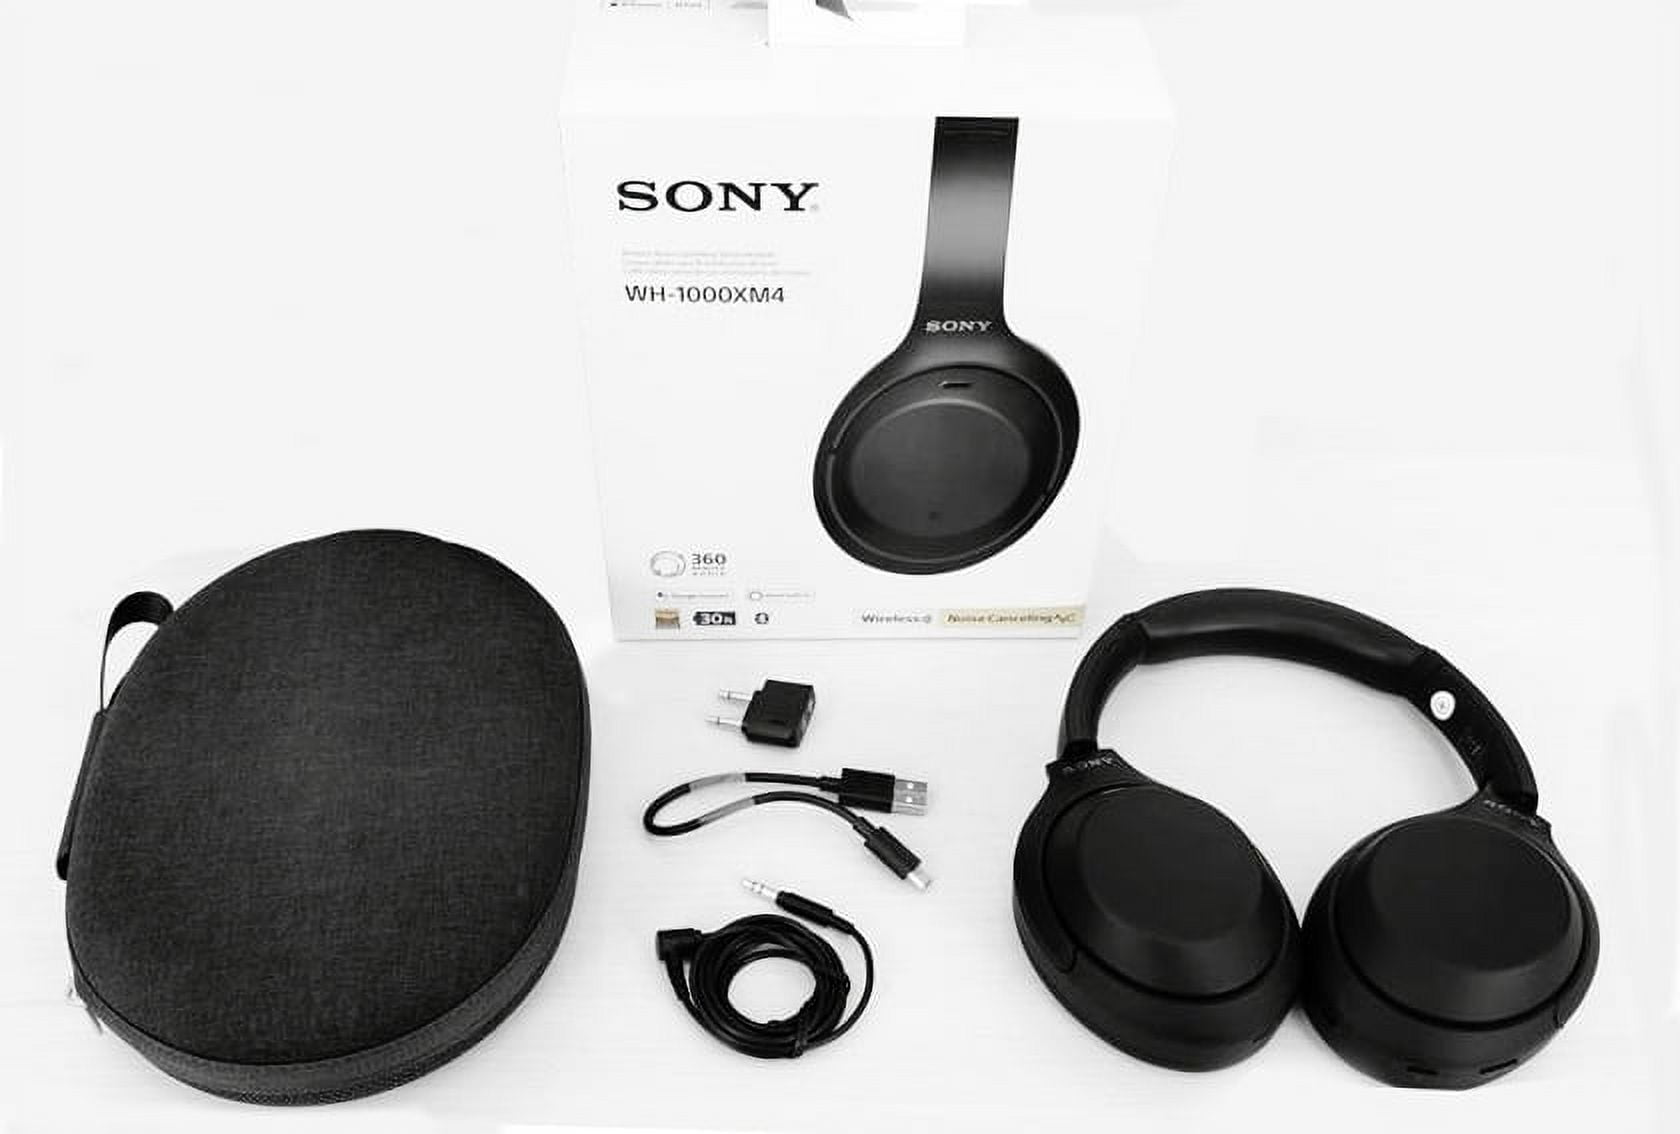 Sony WH-1000XM4 Wireless Noise-Canceling Over-Ear Headphones